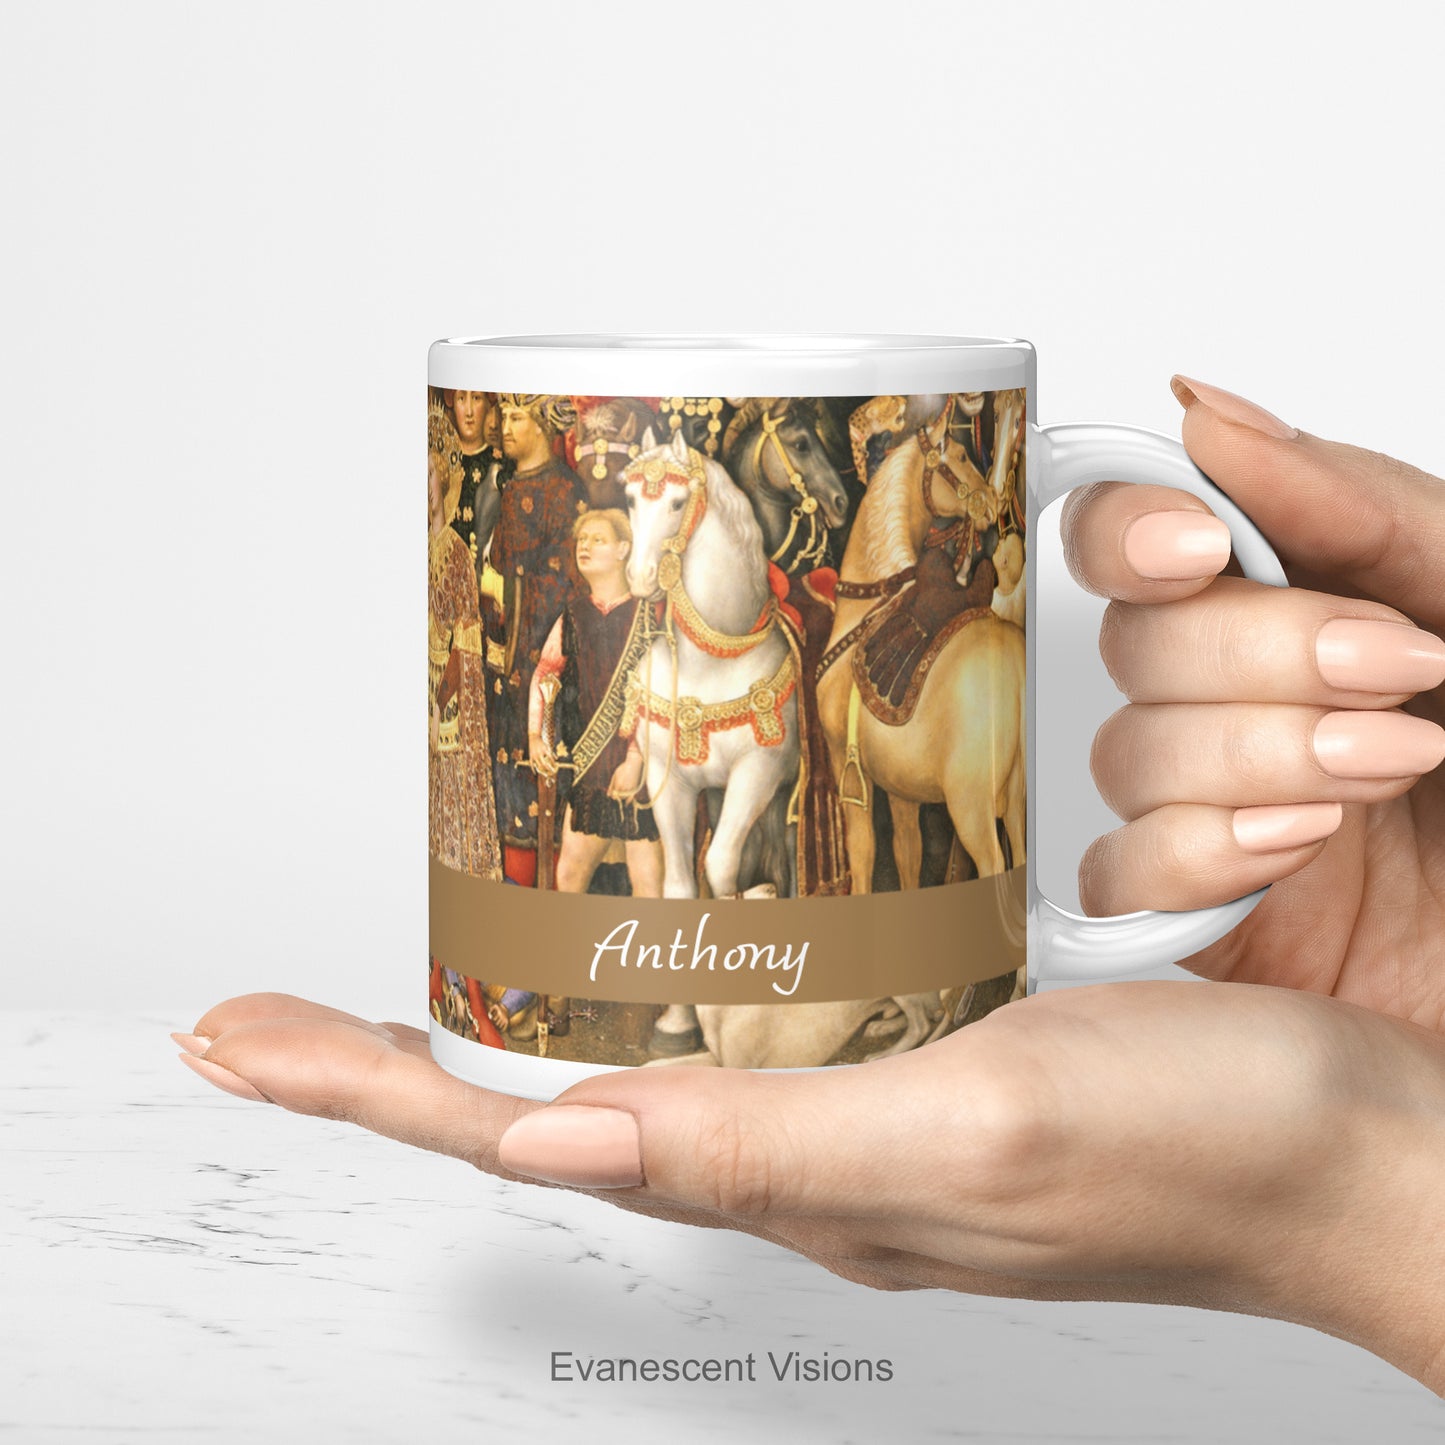 Adoration of the Magi nativity scene personalised ceramic mug, being held in a woman's hand